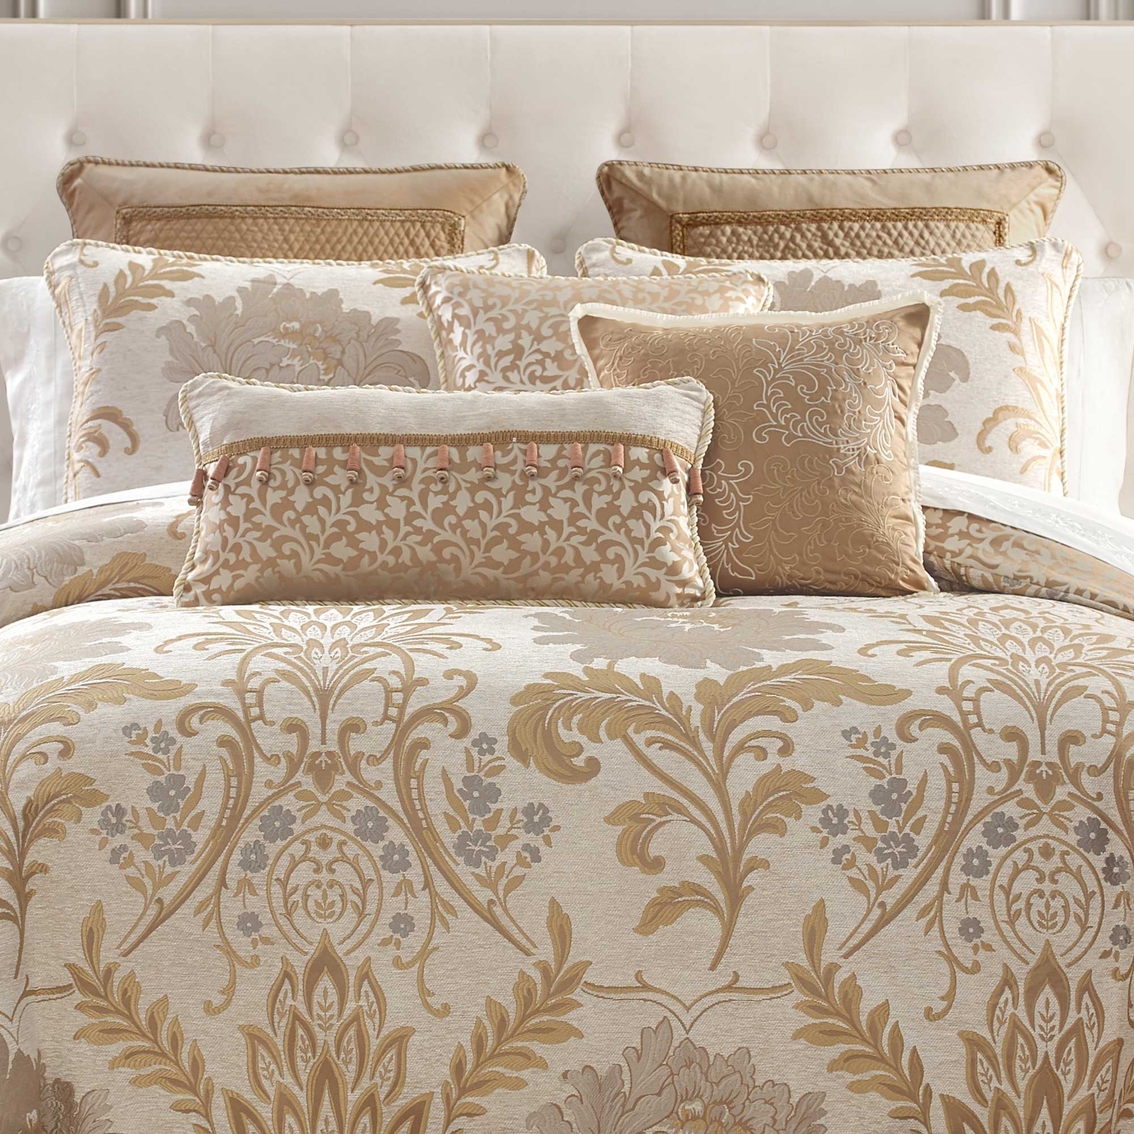 Waterford Ansonia 6 pc. Comforter Set - Image 6 of 7